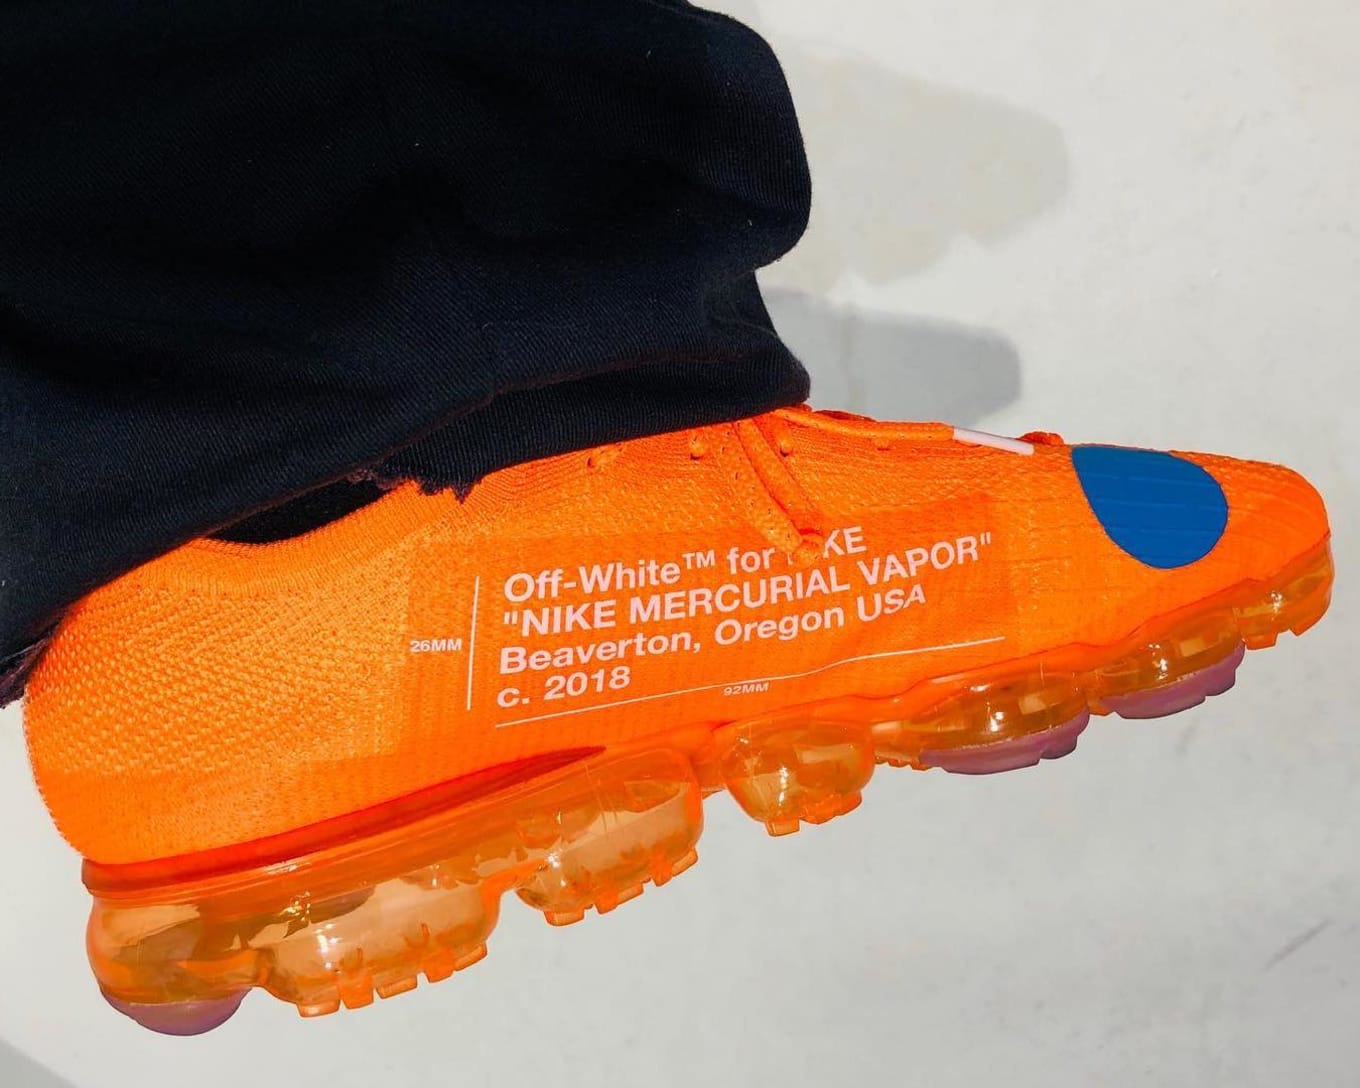 Off-White Teases the Nike Mercurial Vapormax. | Sole Collector